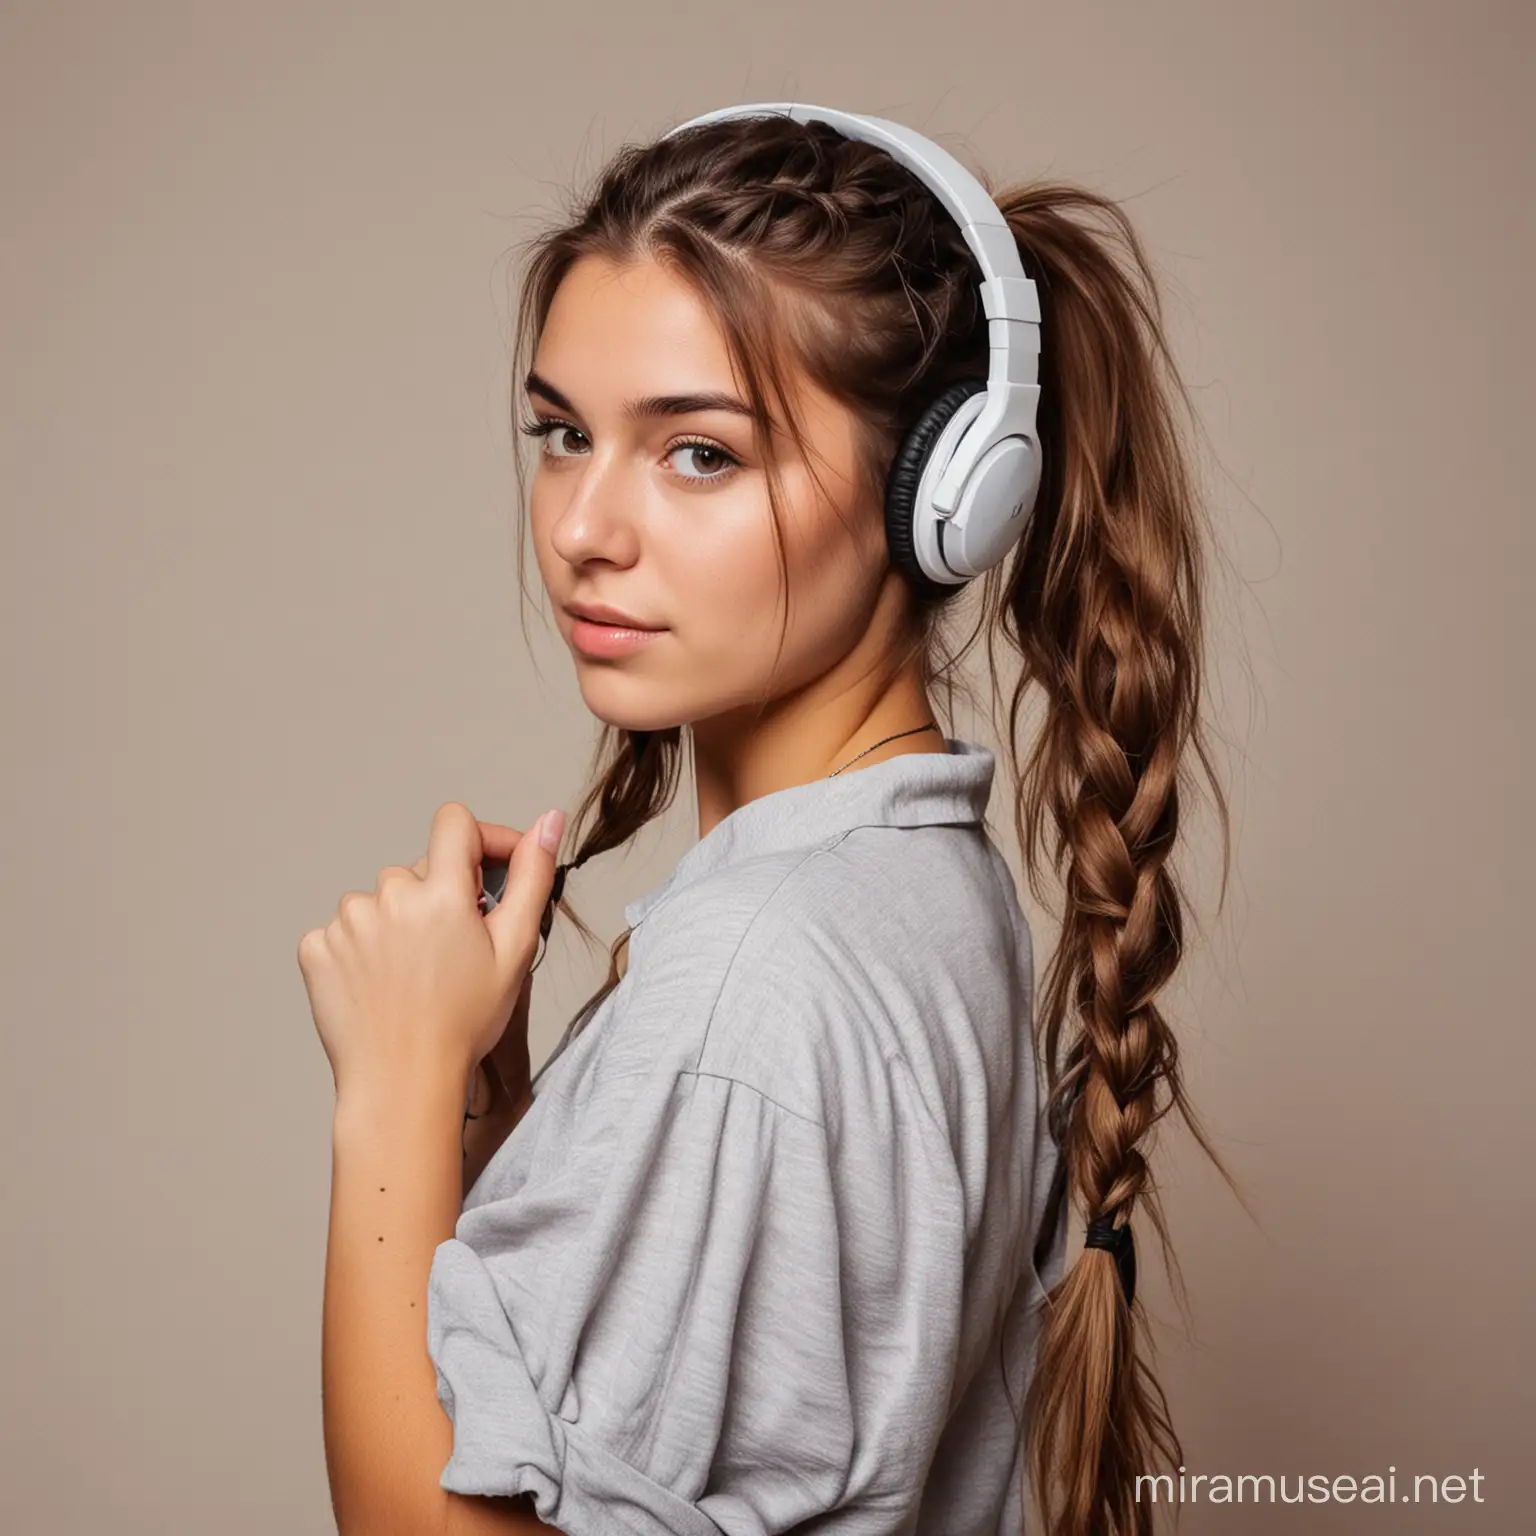 Shy Girl with Messy Braided Ponytail Listening to Music